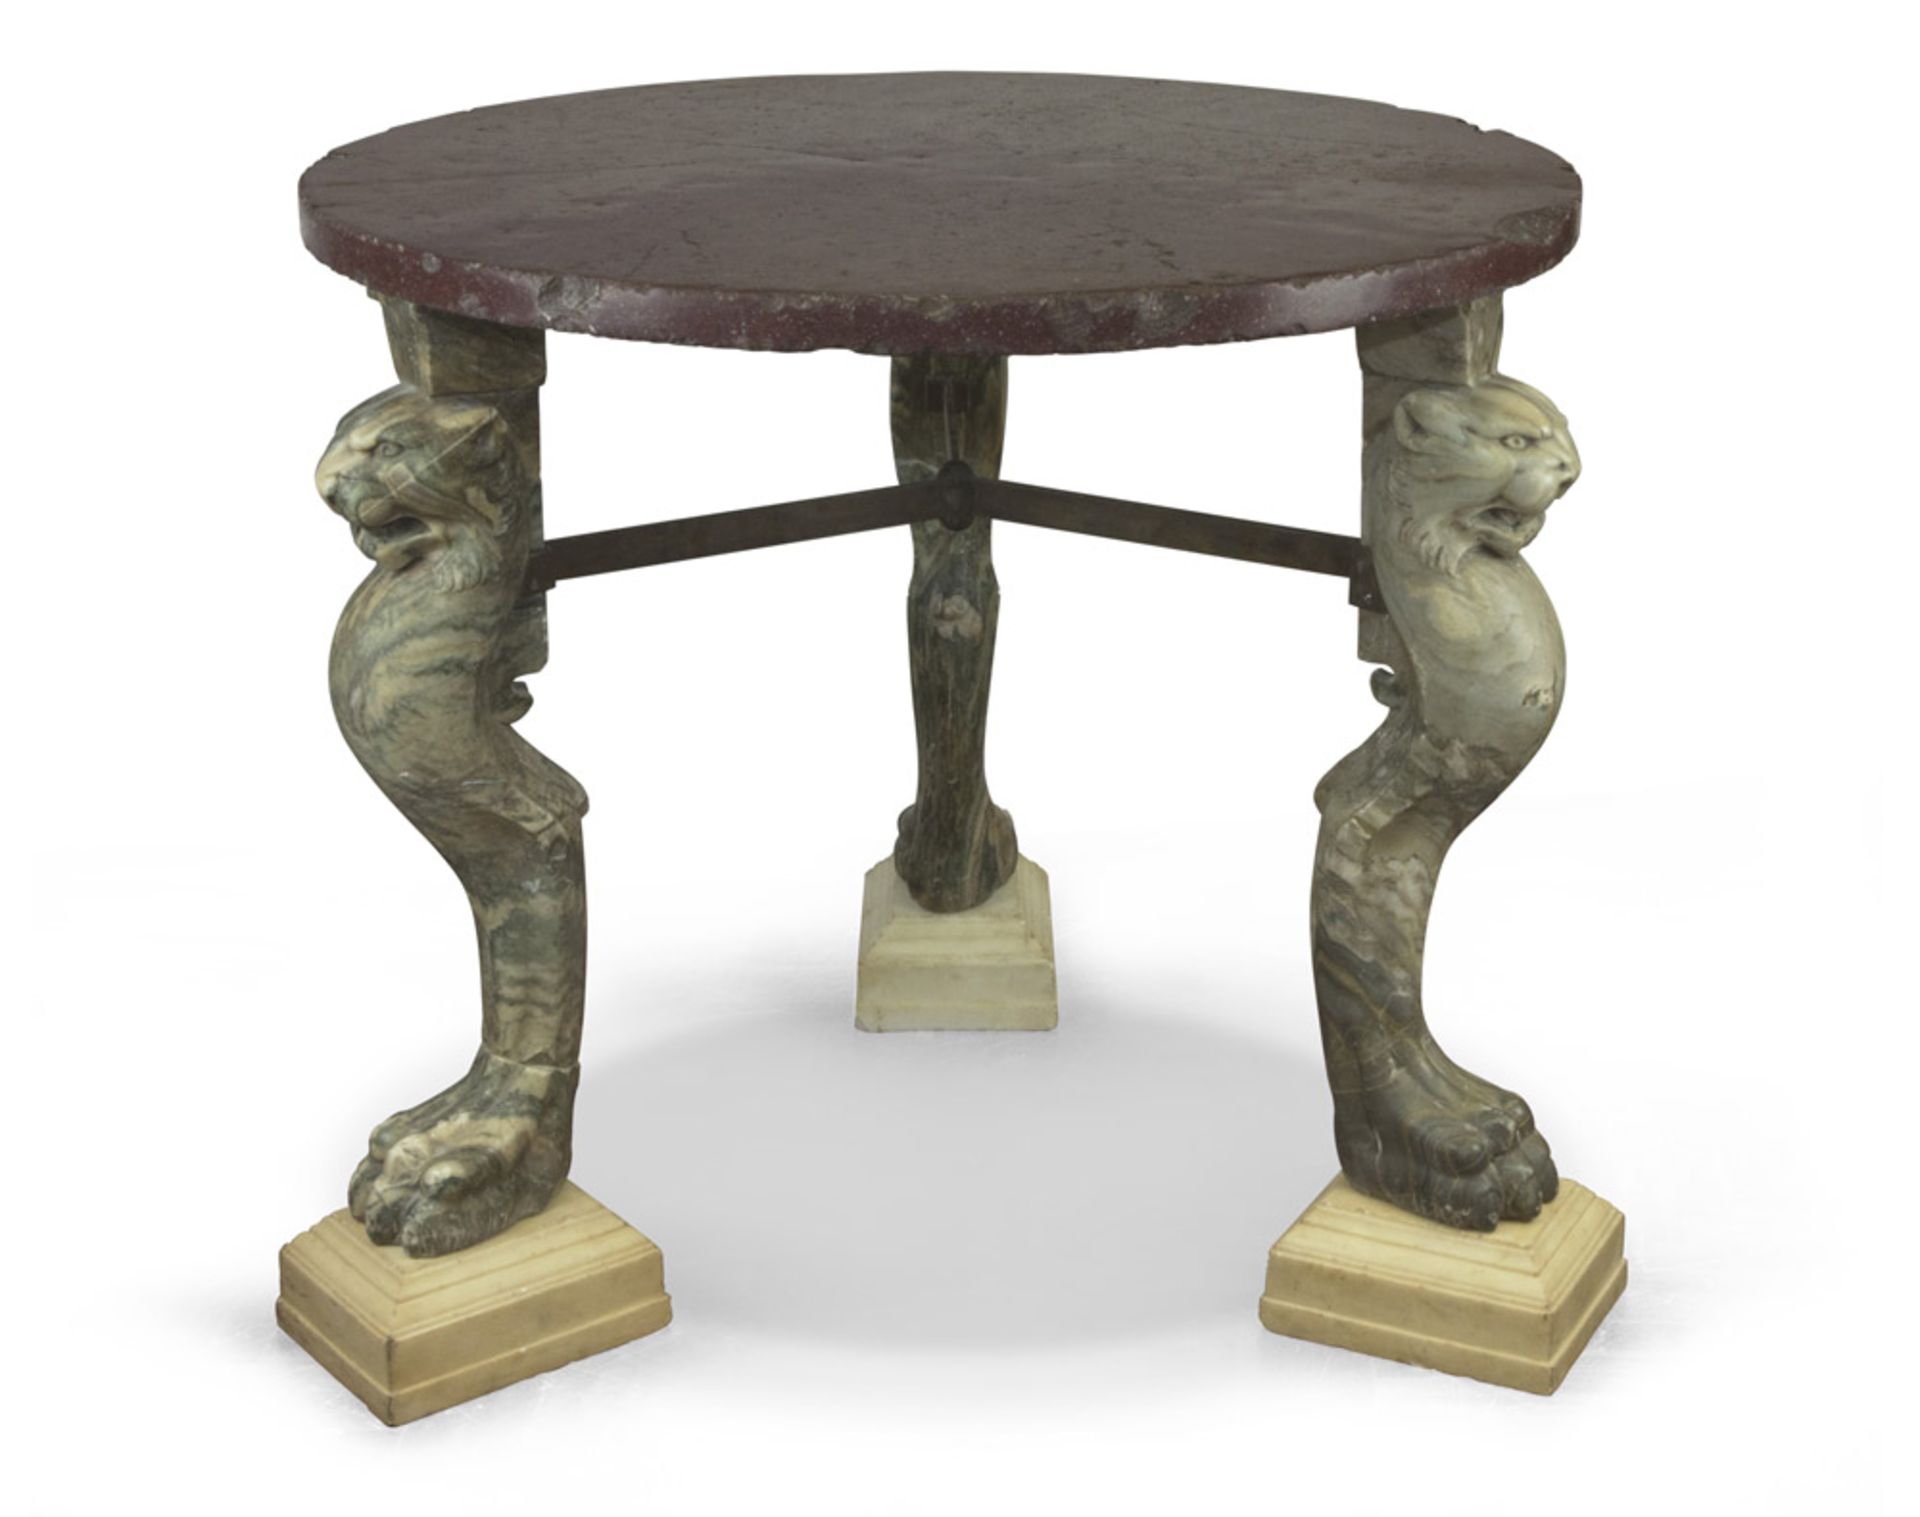 RARE TABLE IN PORFIDO AND CIPOLLINO, MANUFACTURE ROMAN 18TH CENTURY with circular top of tall